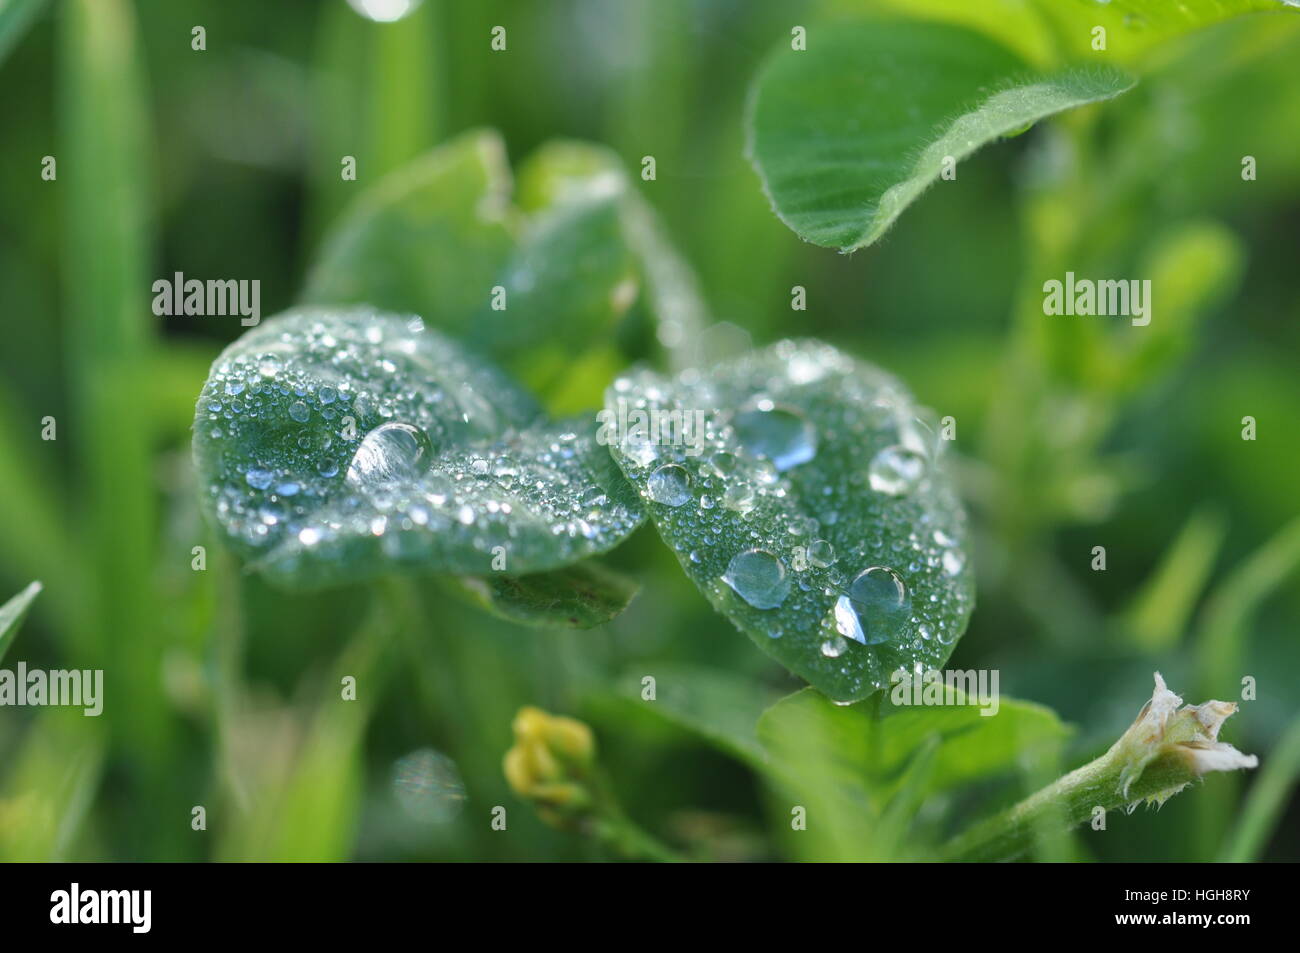 Tiny dewdrops on a clover leaf. Stock Photo